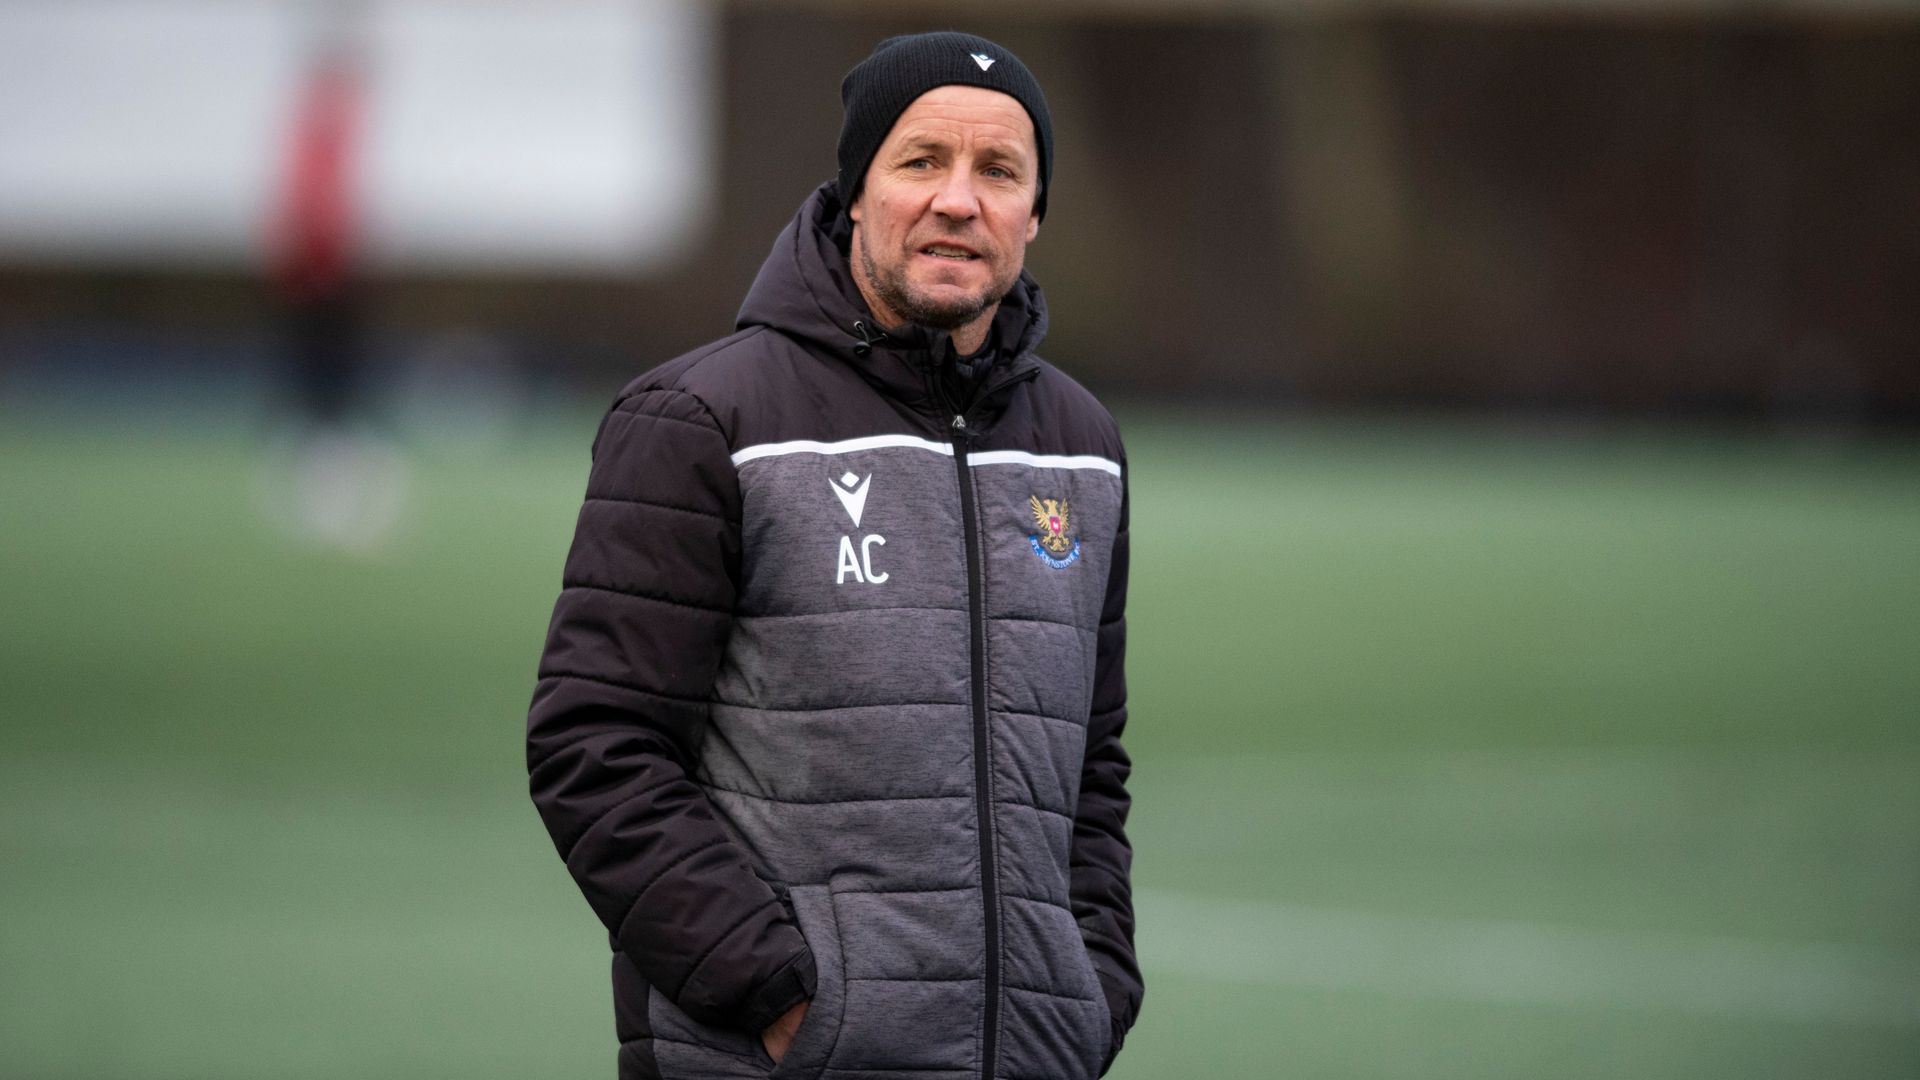 St Johnstone caretaker expects a lot of interest in managerial vacancy